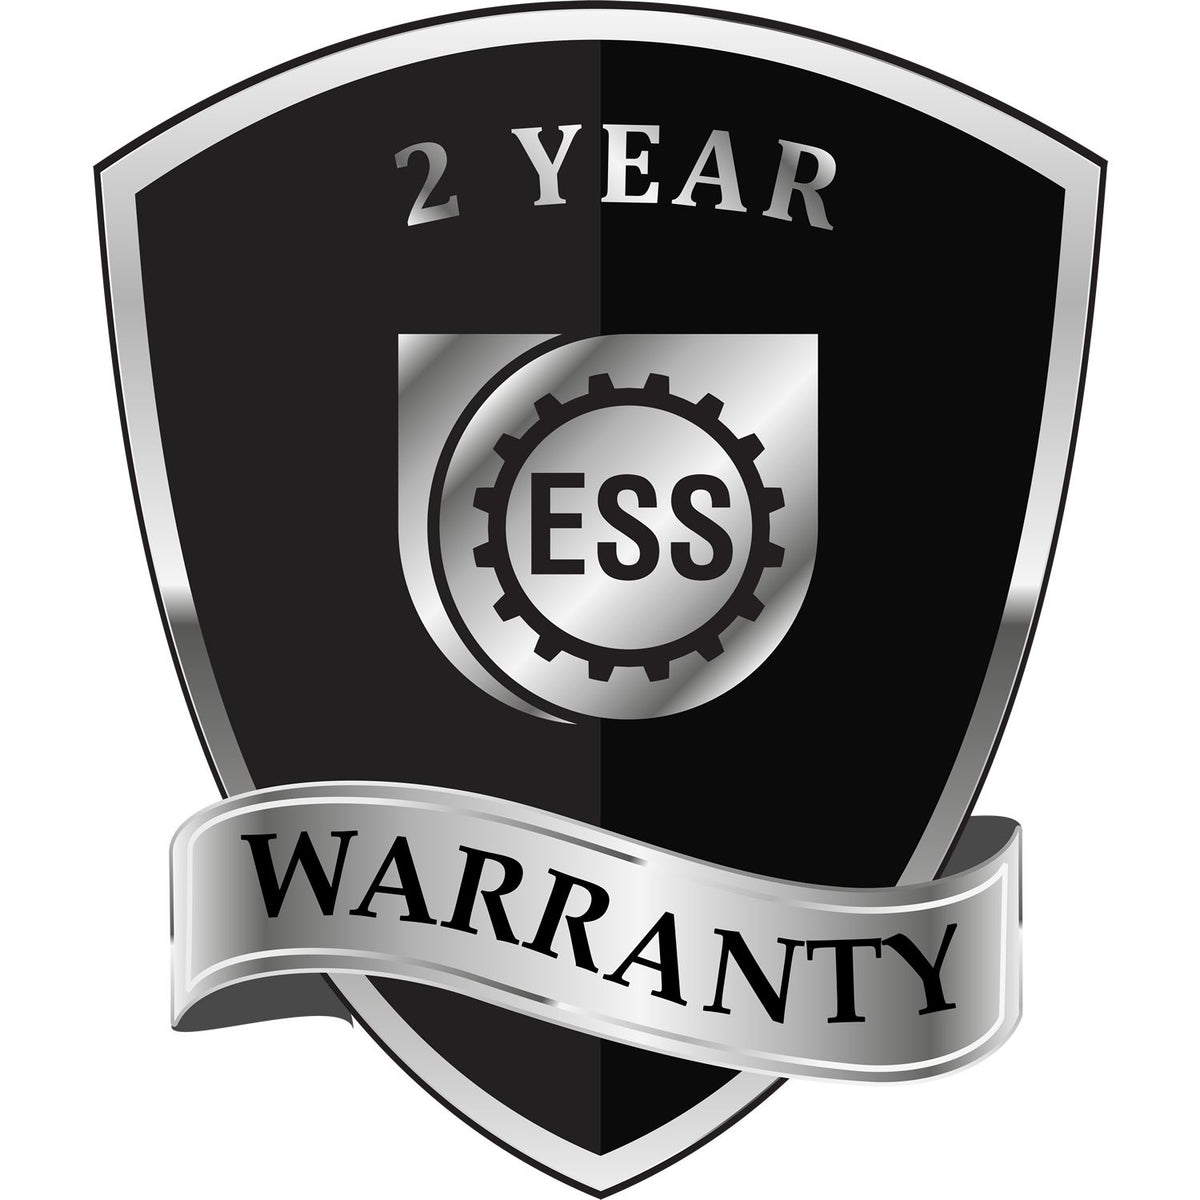 A badge or emblem showing a warranty icon for the Handheld Hawaii Land Surveyor Seal